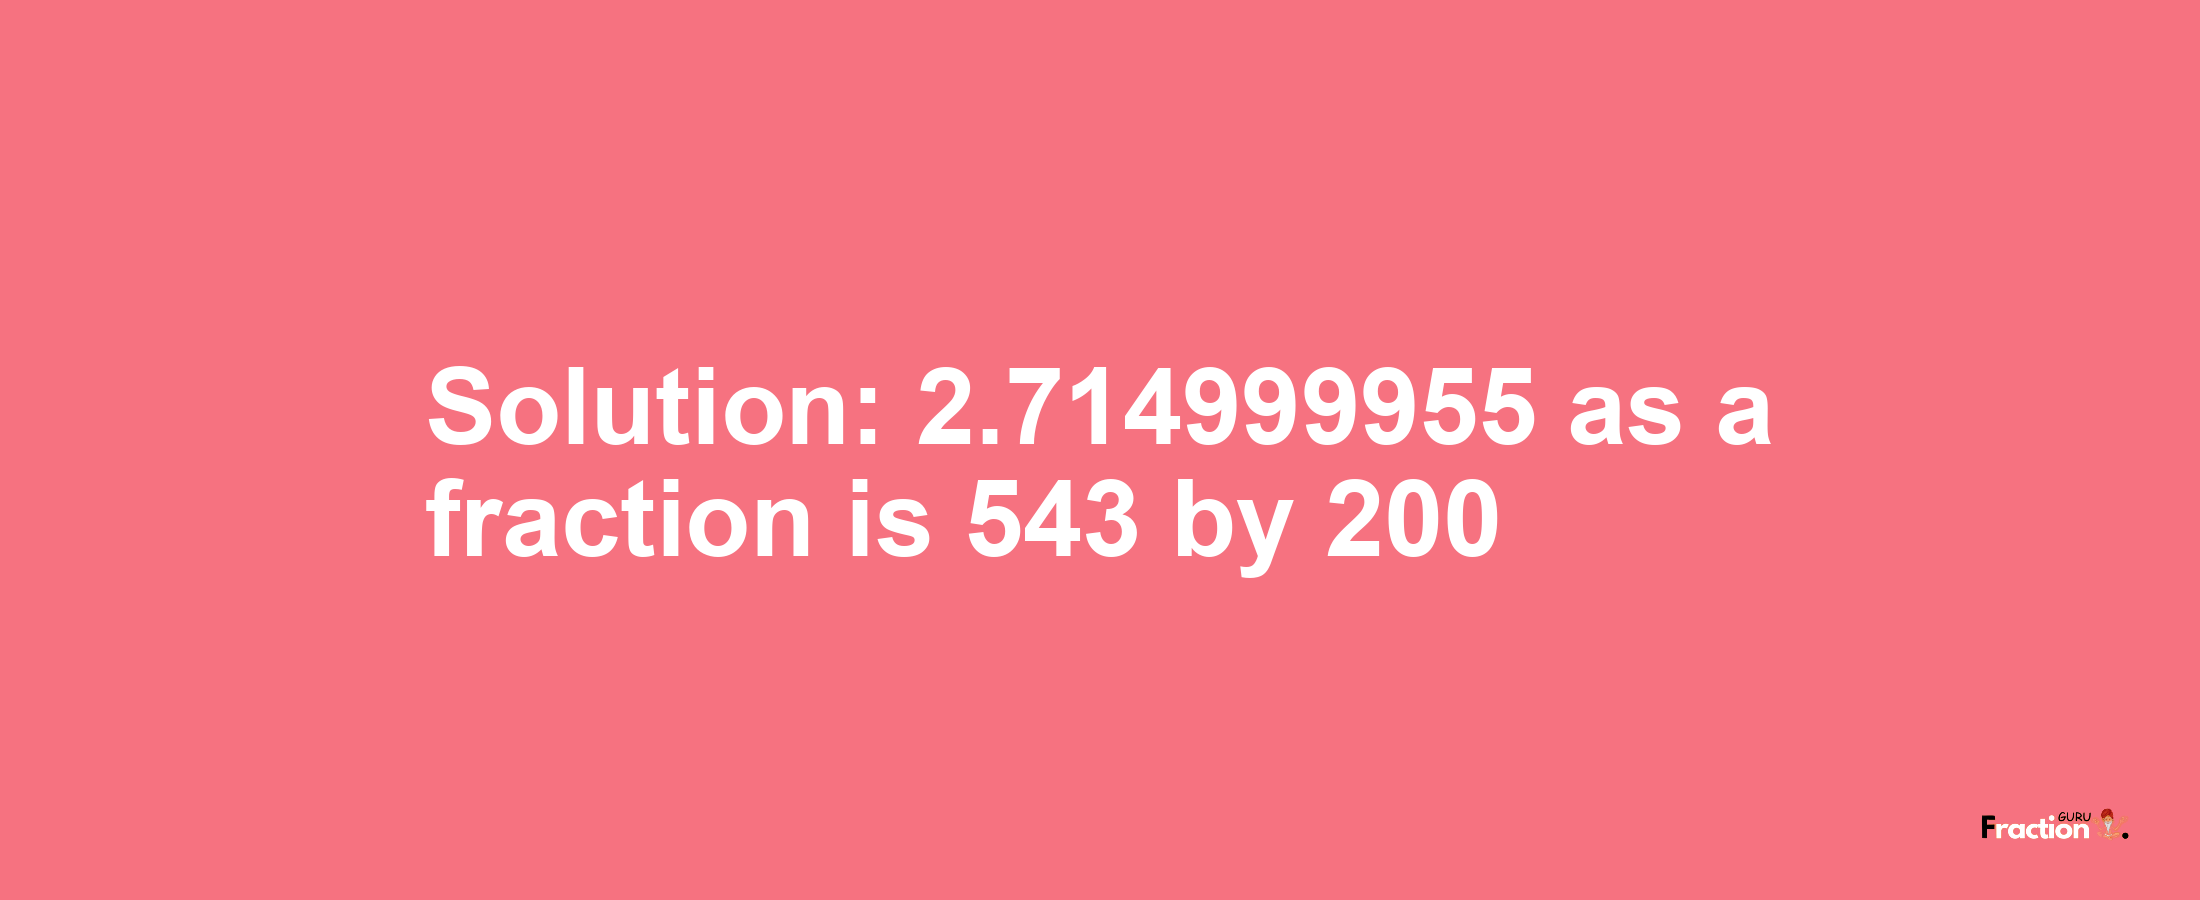 Solution:2.714999955 as a fraction is 543/200